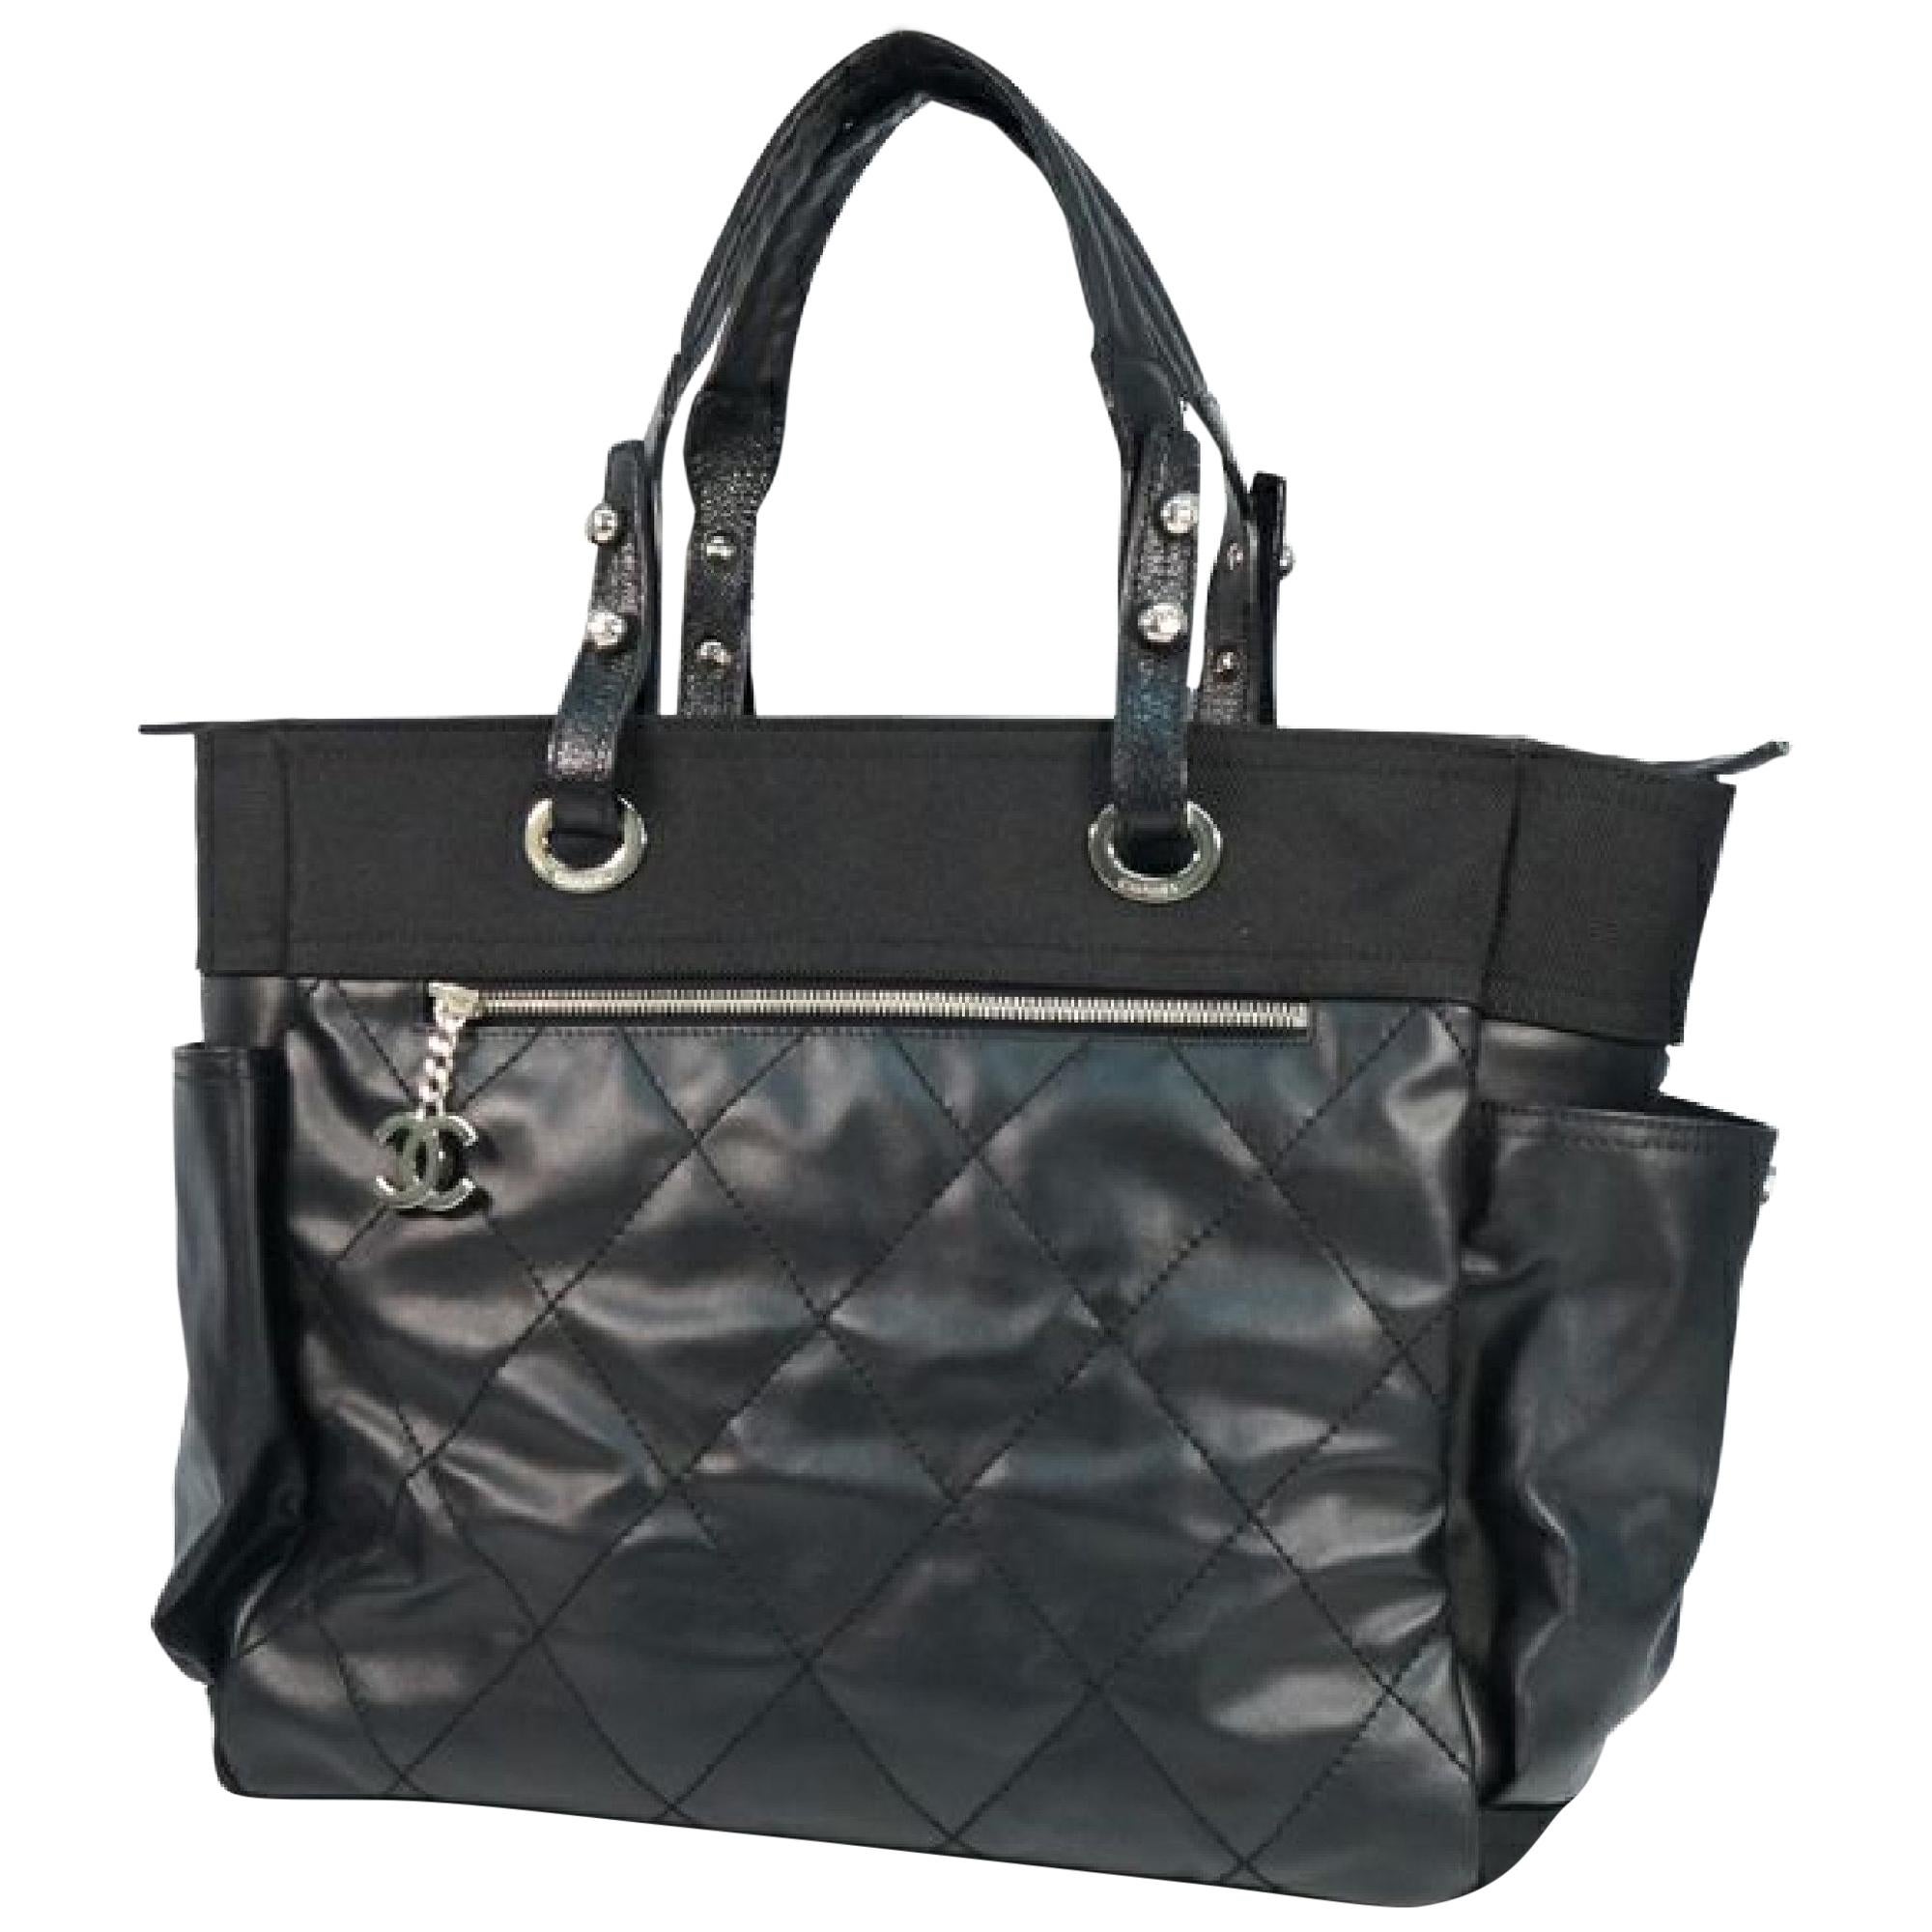 Chanel Silver Quilted Coated Canvas Paris-Biarritz Petite Shopping